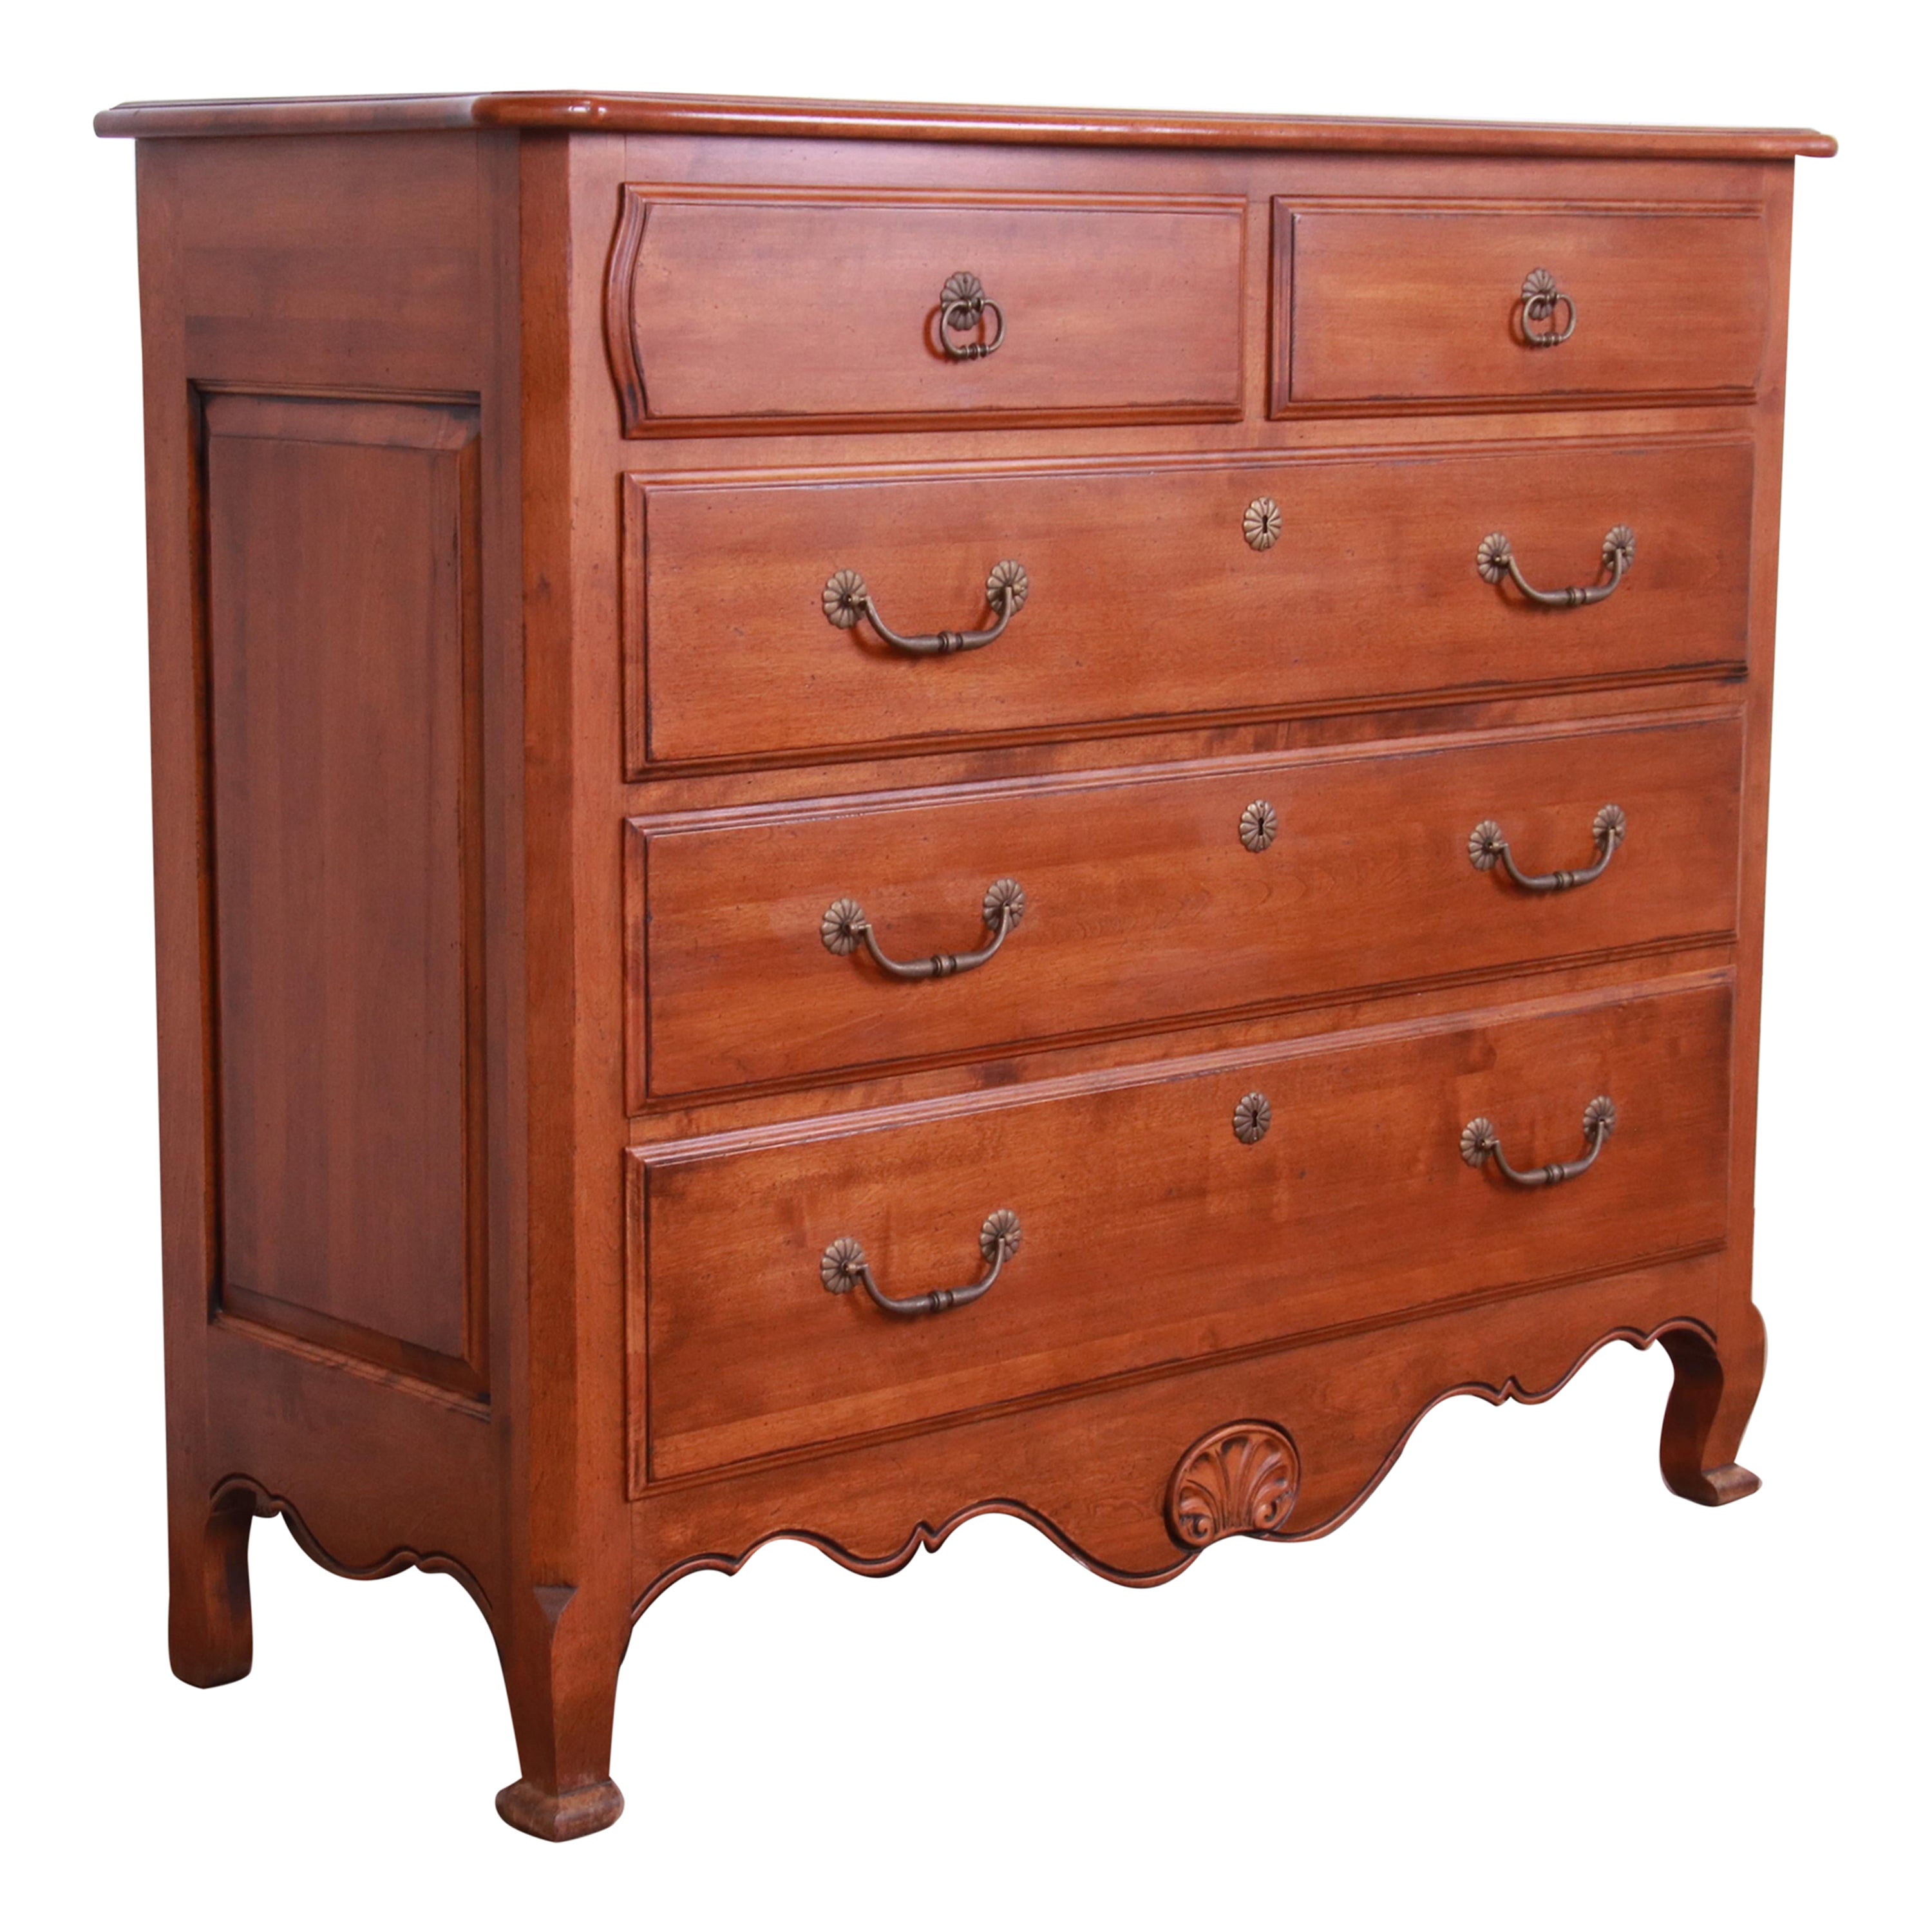 French Provincial Louis XV Solid Maple Chest of Drawers